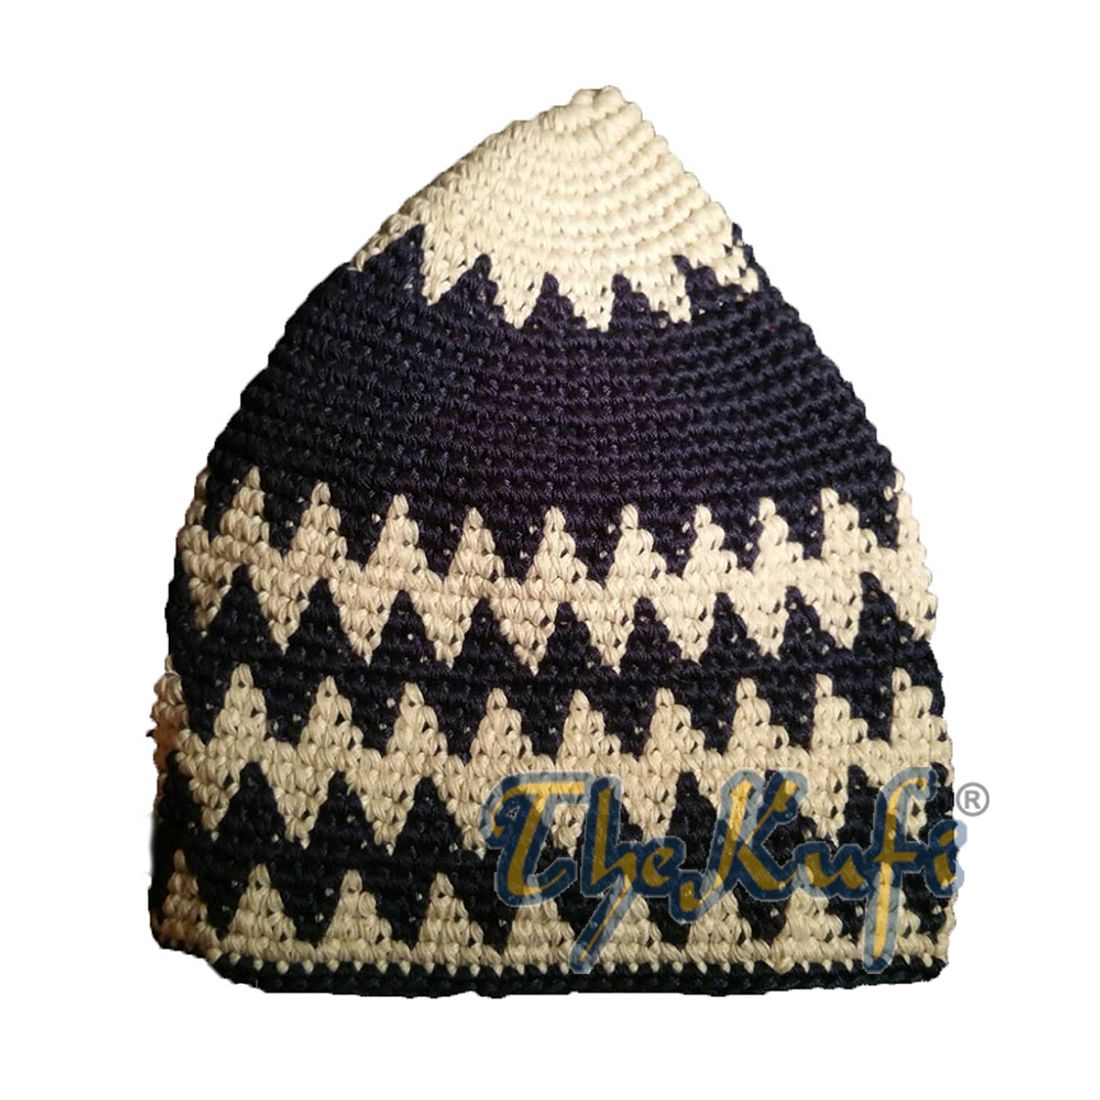 Hand-crocheted Cotton Sturdy Off-White & Dark Blue Hounds-tooth Zigzag Kufi Hat